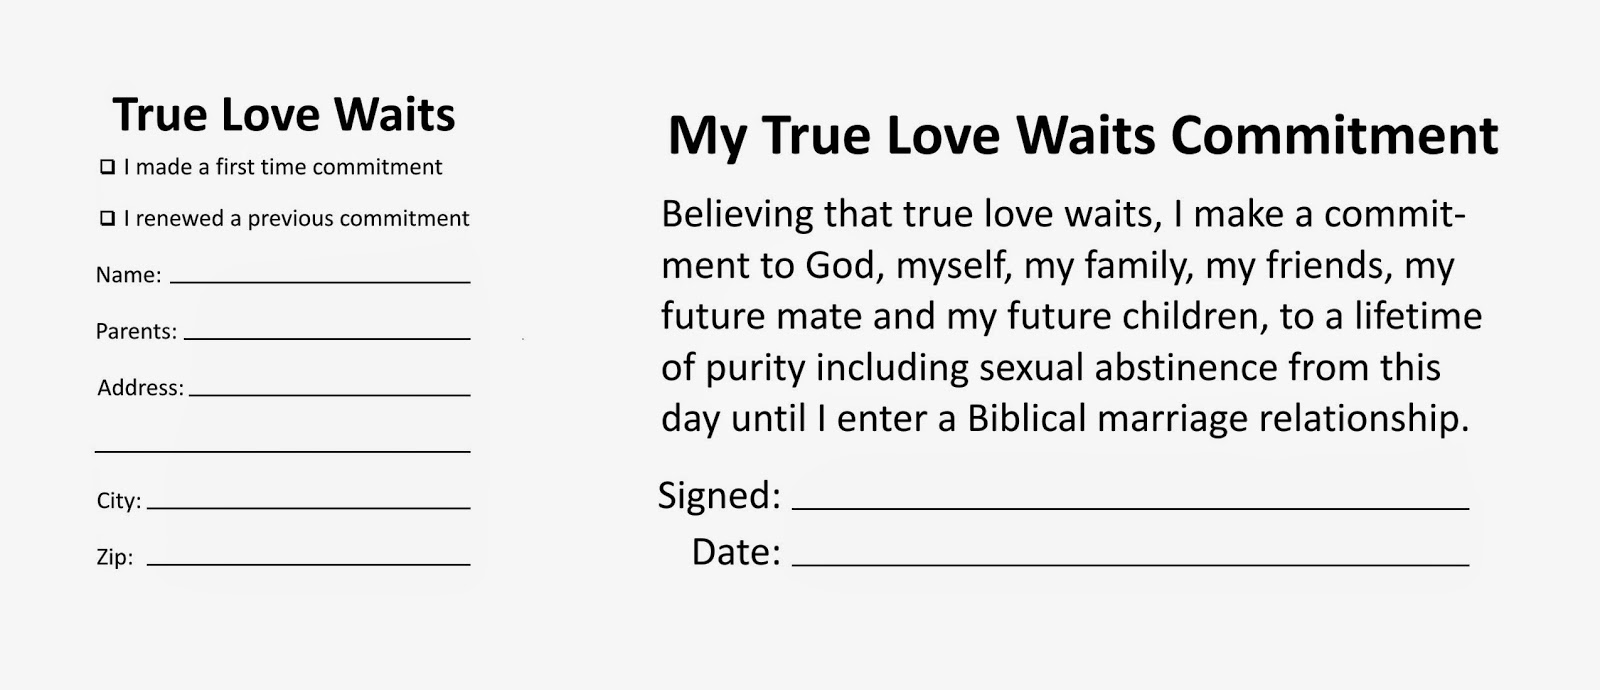 postconsumer-reports-true-love-waits-what-my-youth-pastor-did-right